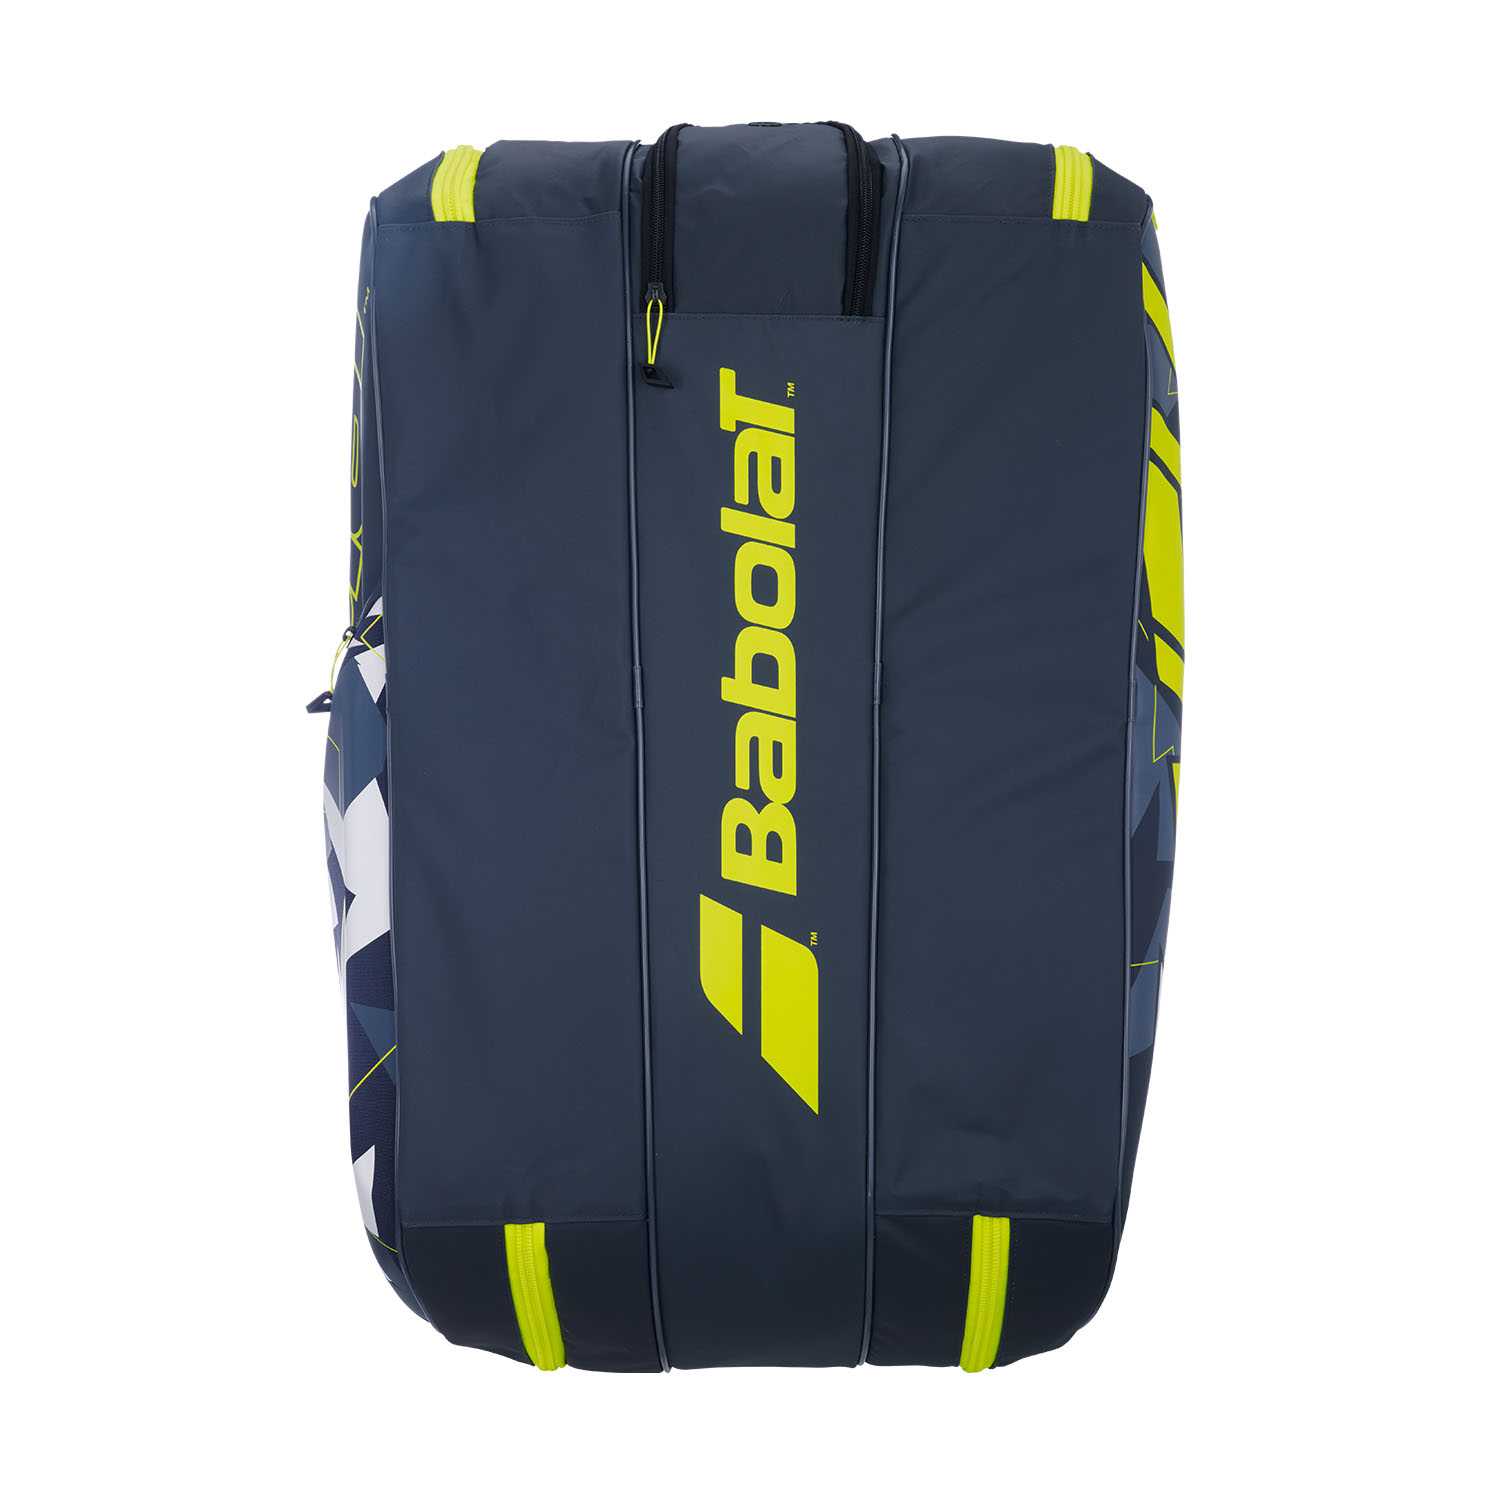 TennisHub - Are you in the Drive or Aero camp? Get the latest Babolat Pure  series bags at TennisHub! The new Pure Drive backpack is now also a  convertible 3-pack bag, similar